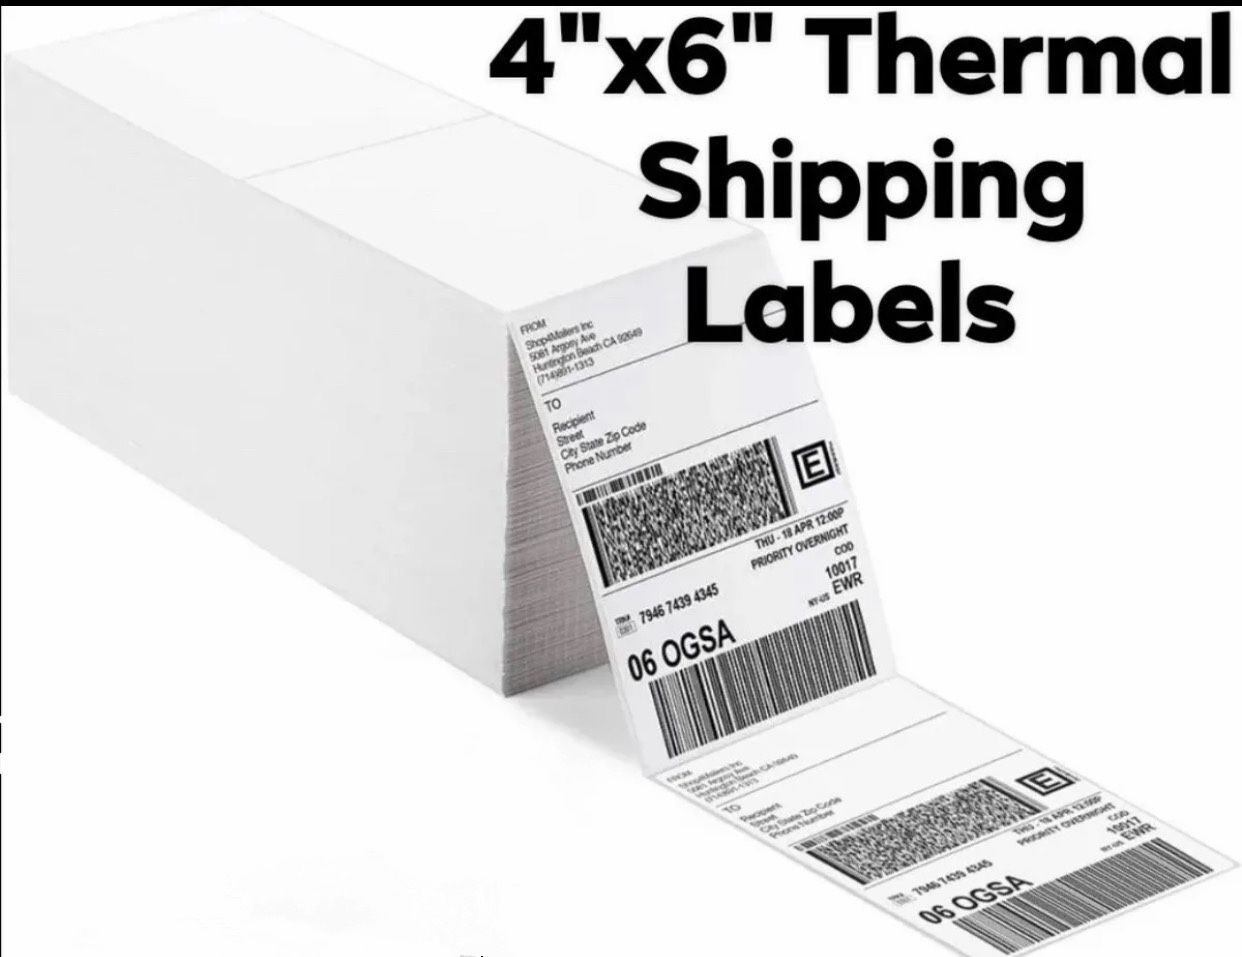 1000 4 x 6 Fanfold Direct Thermal Shipping Labels White Rollo Zebra Printers 